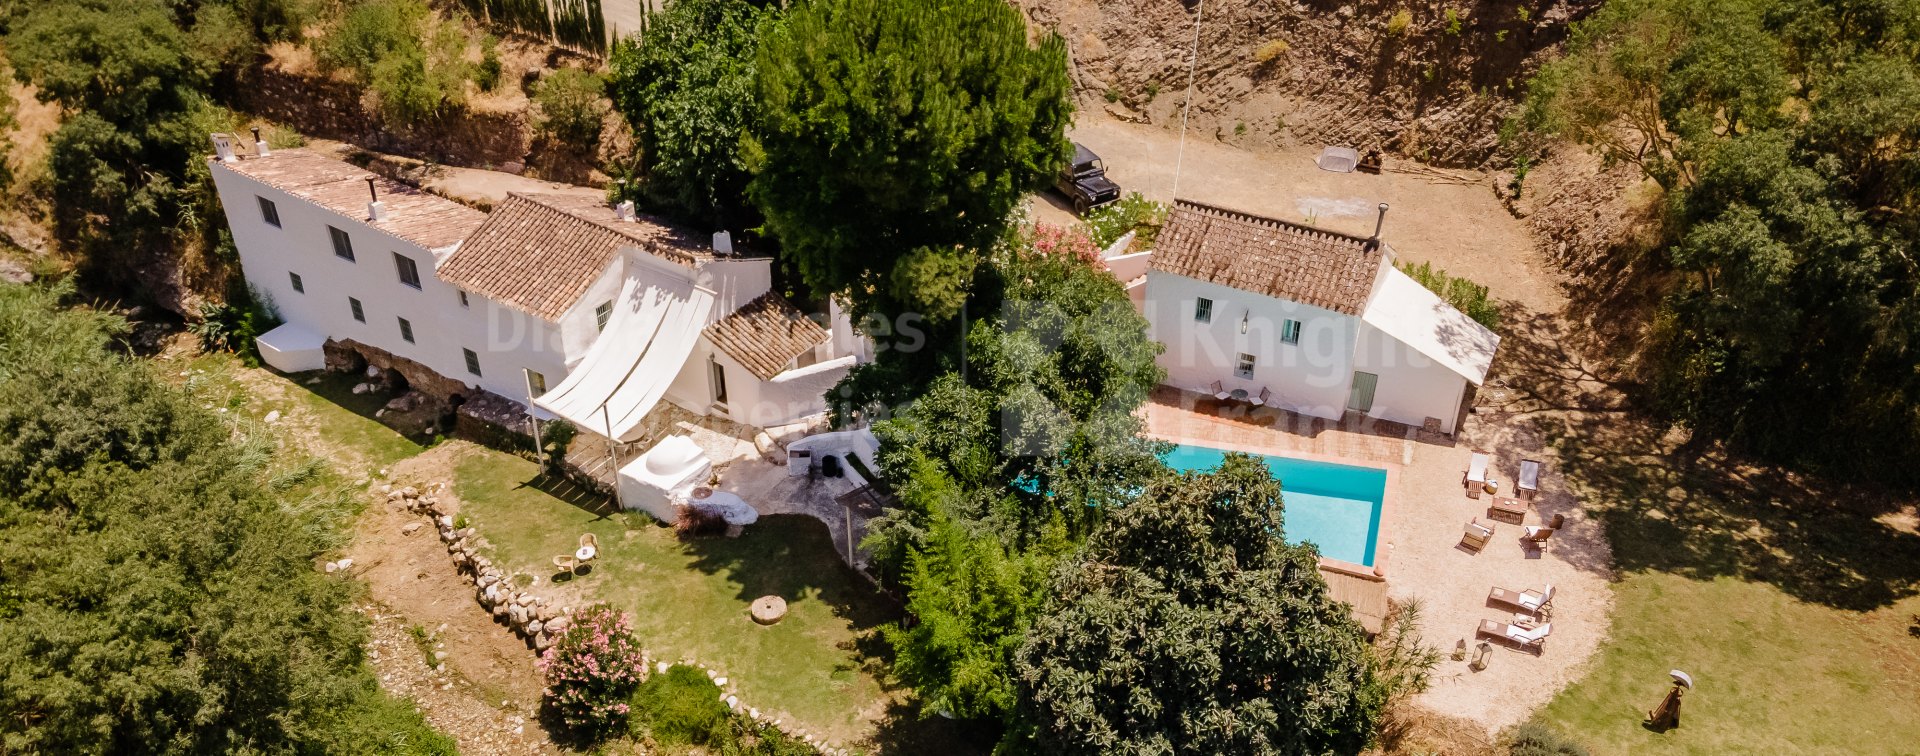 Charming old mill converted into finca in Coin